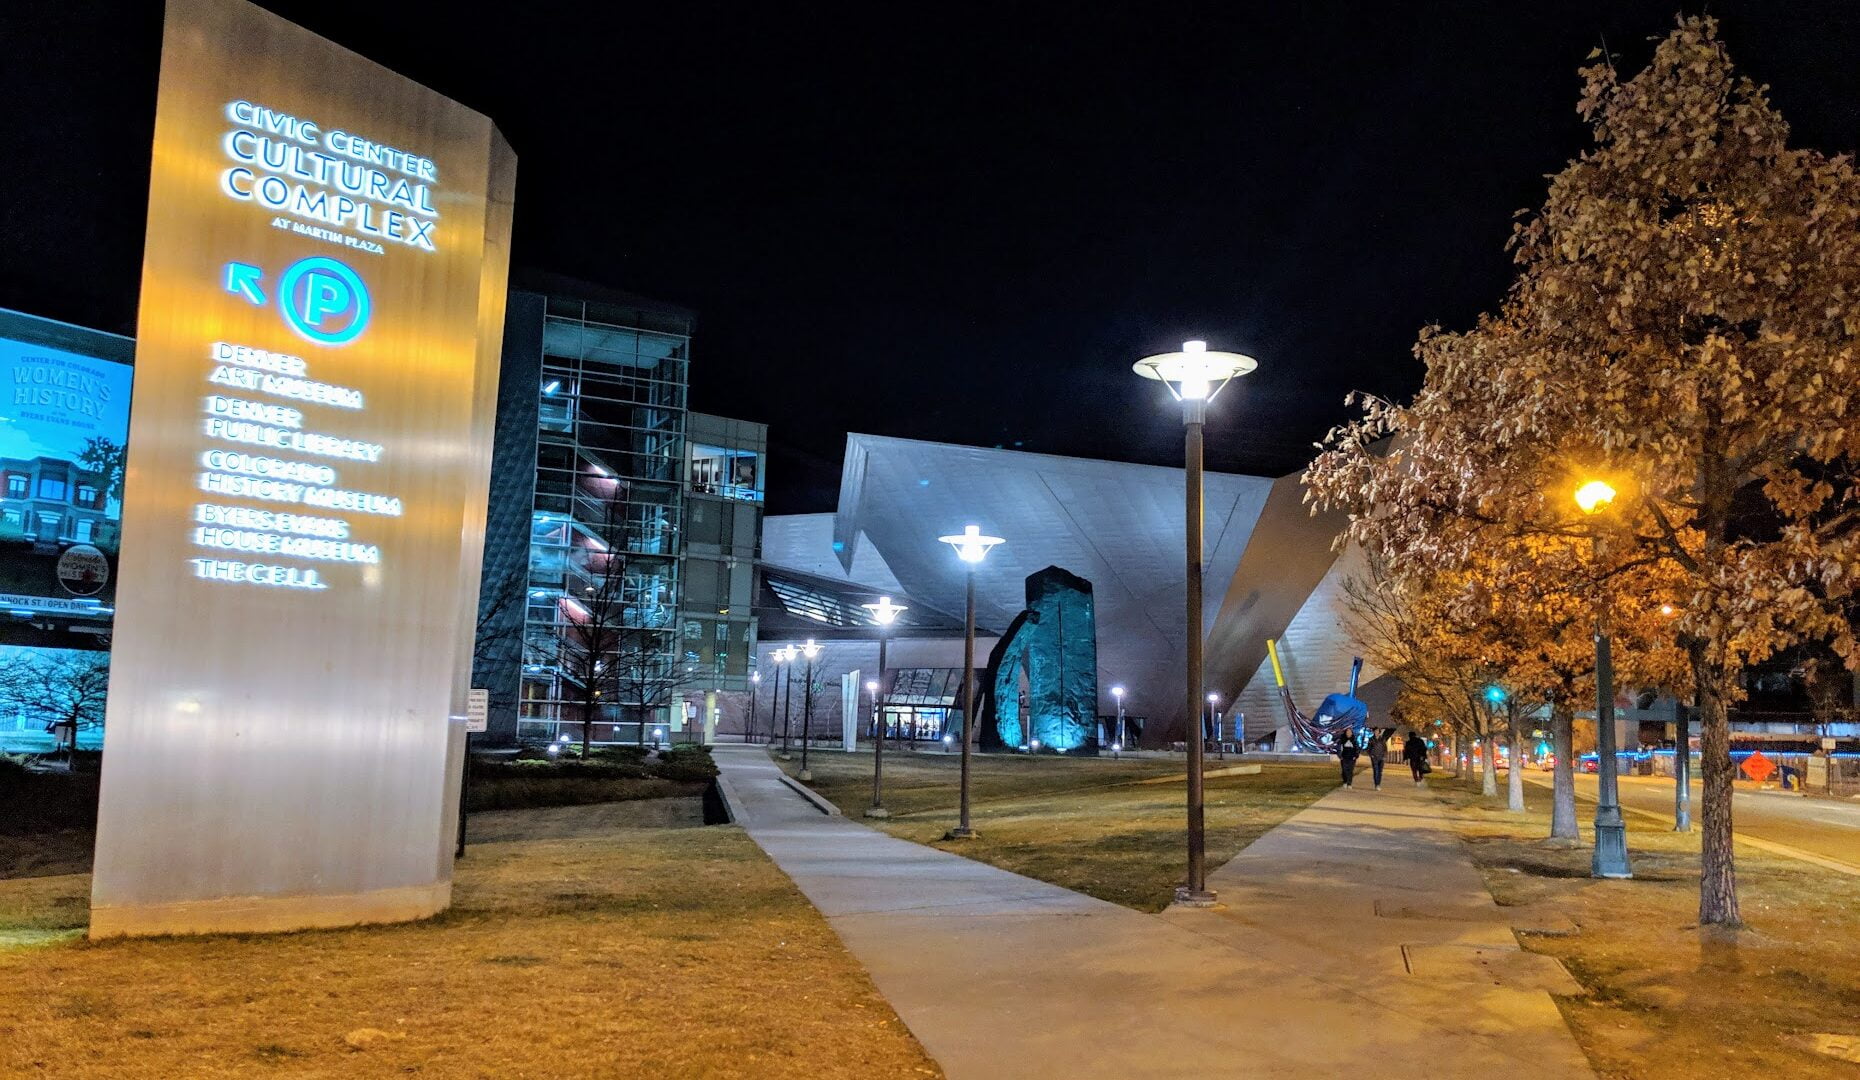 outside of the civic center cultural complex at night